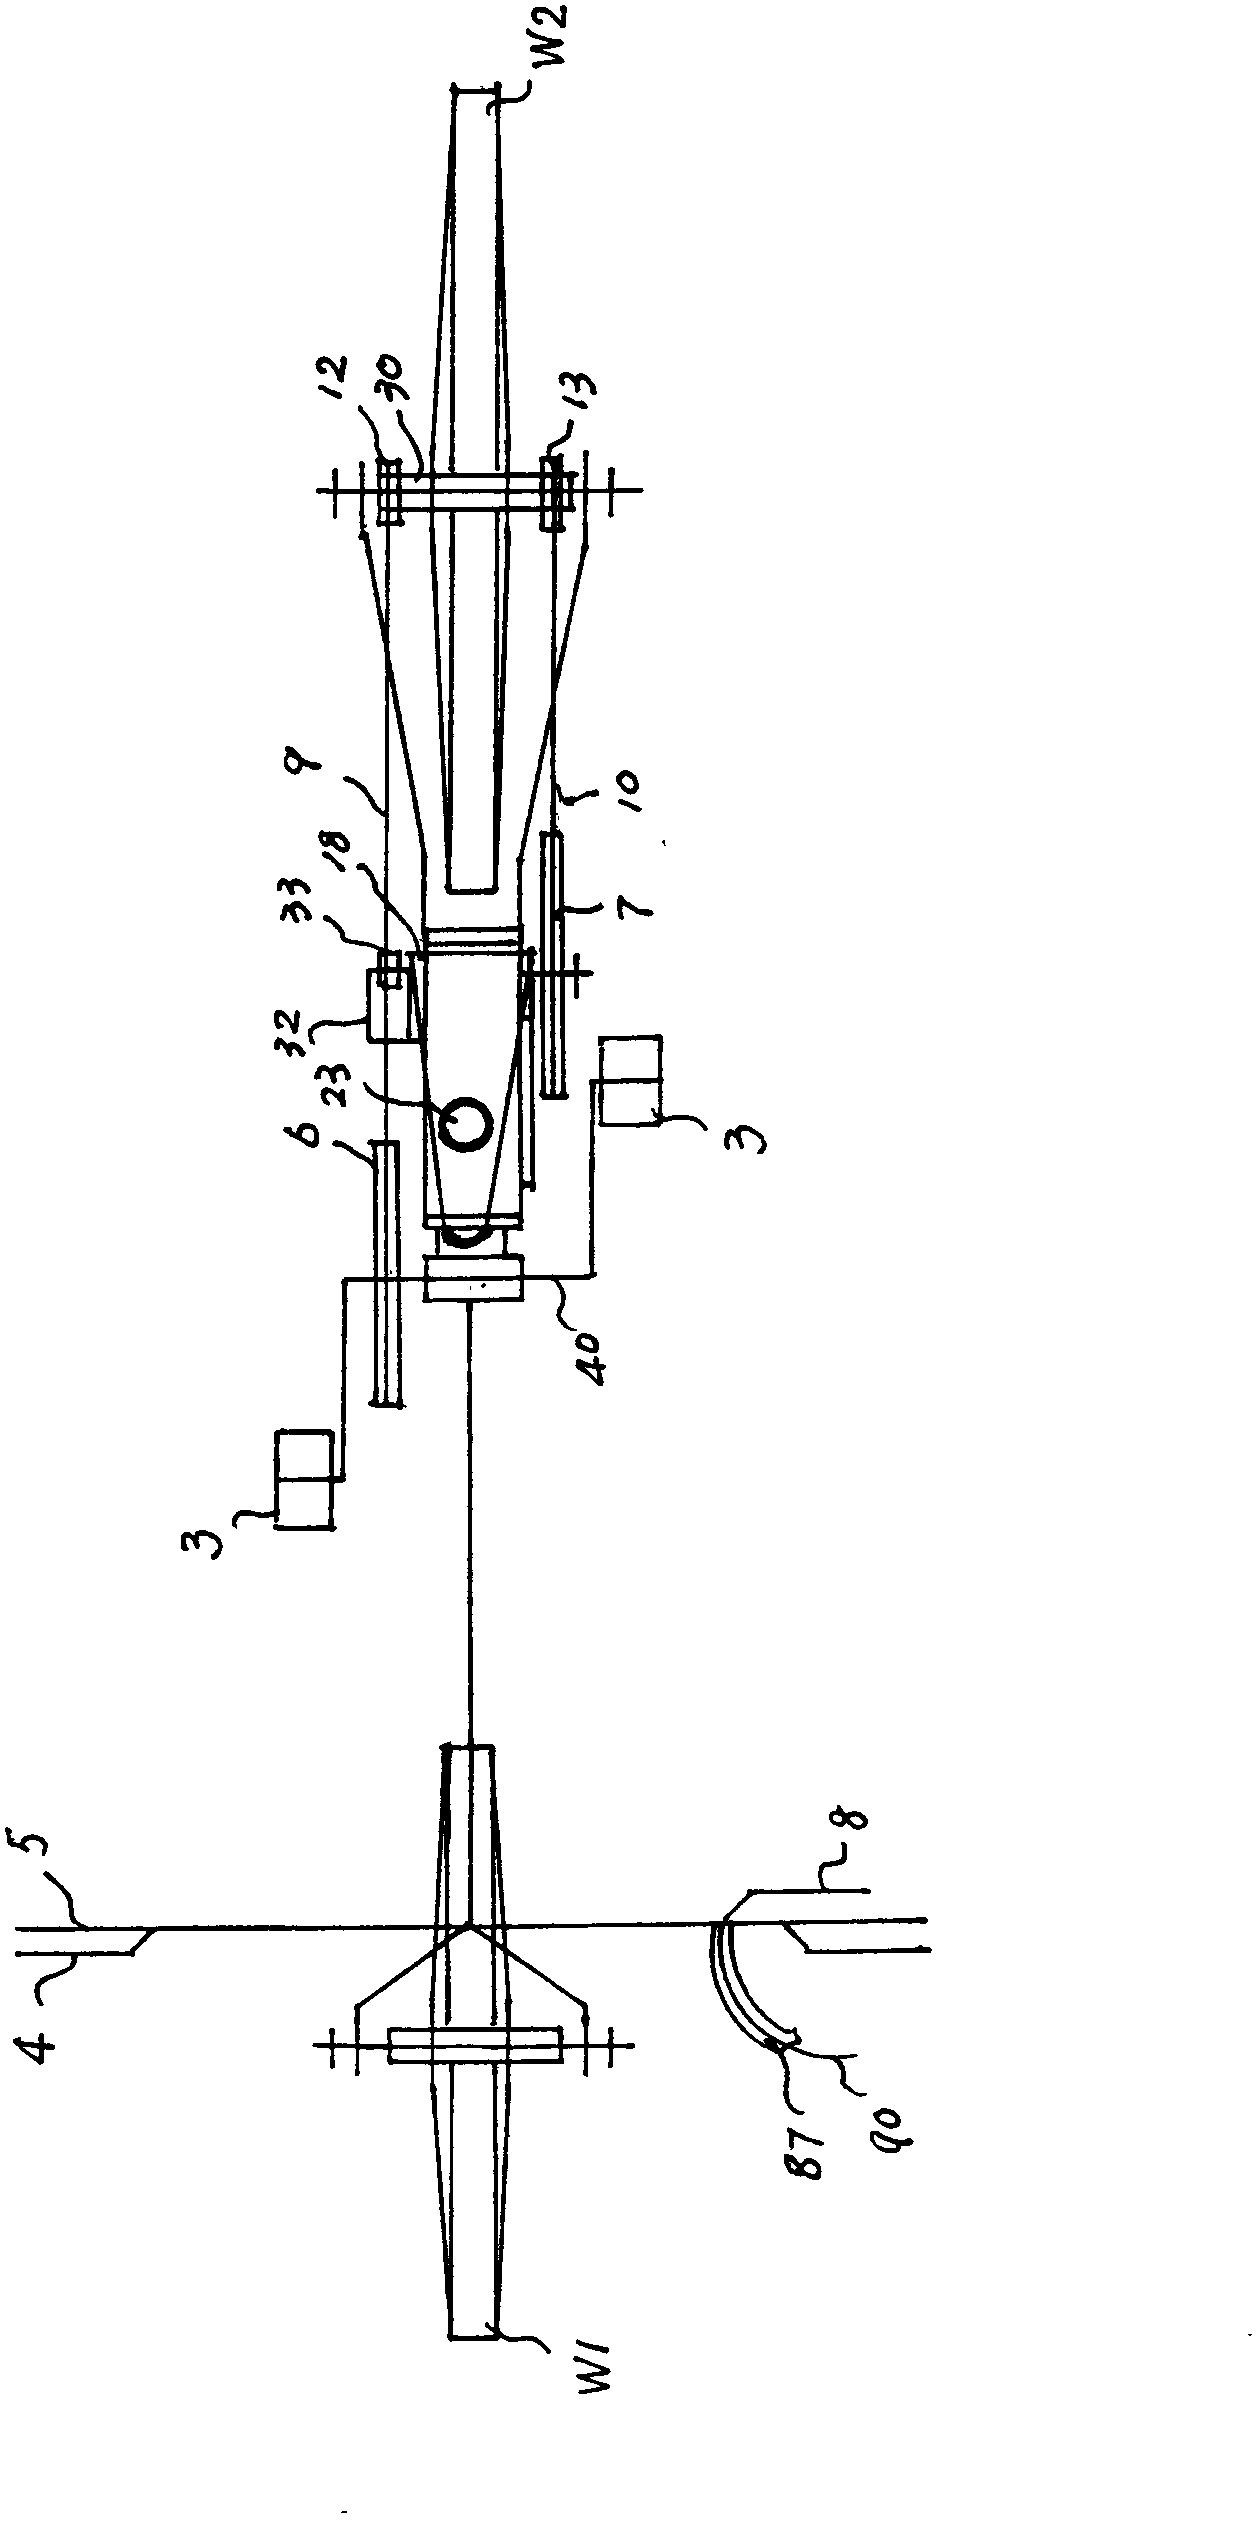 Non-motor vehicle provided with reciprocating type seat